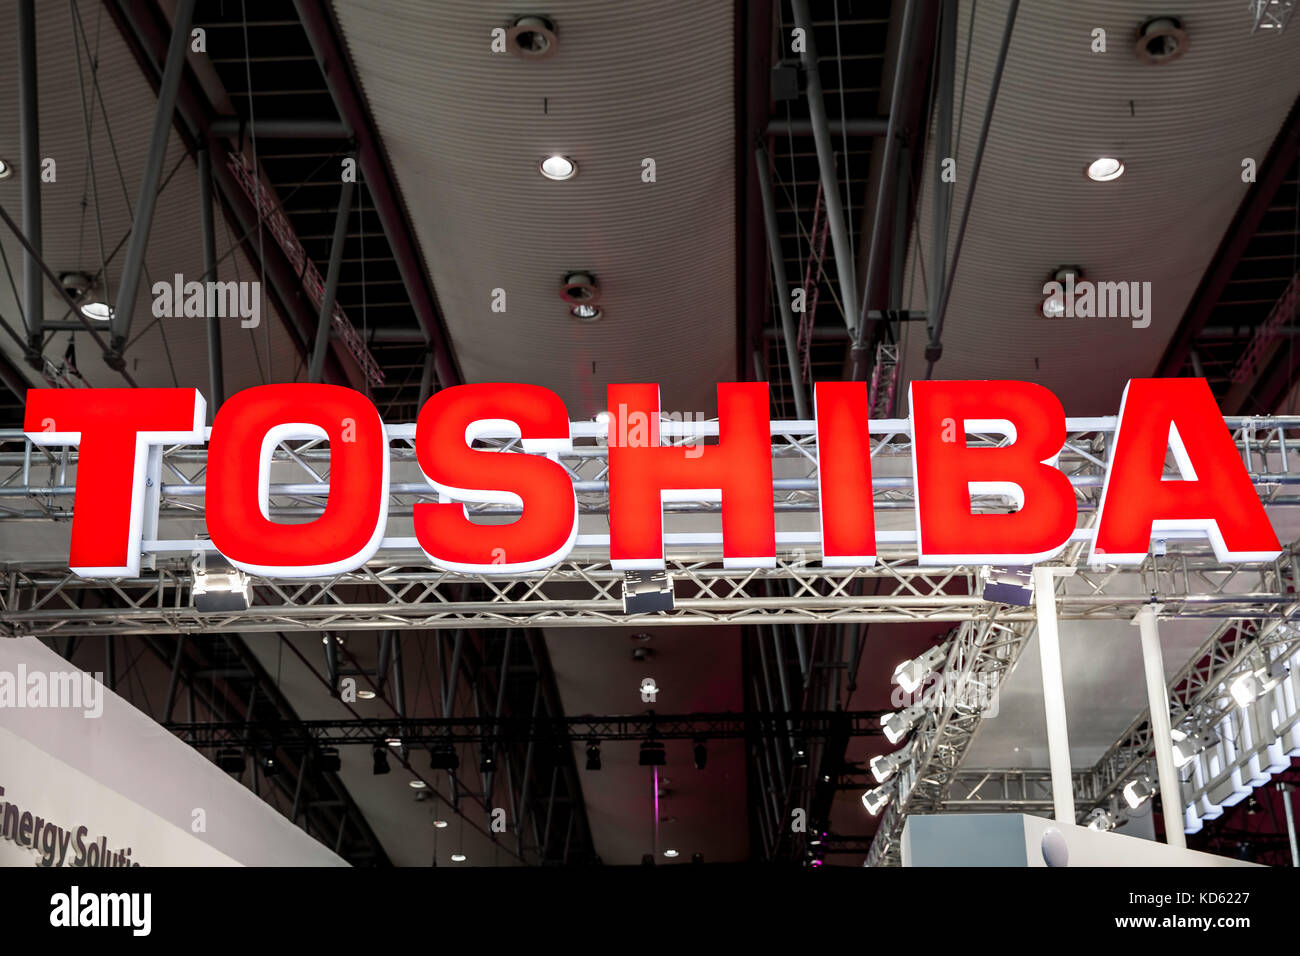 Toshiba company logo sign on exhibition fair Cebit 2017 in Hannover Messe, Germany Stock Photo